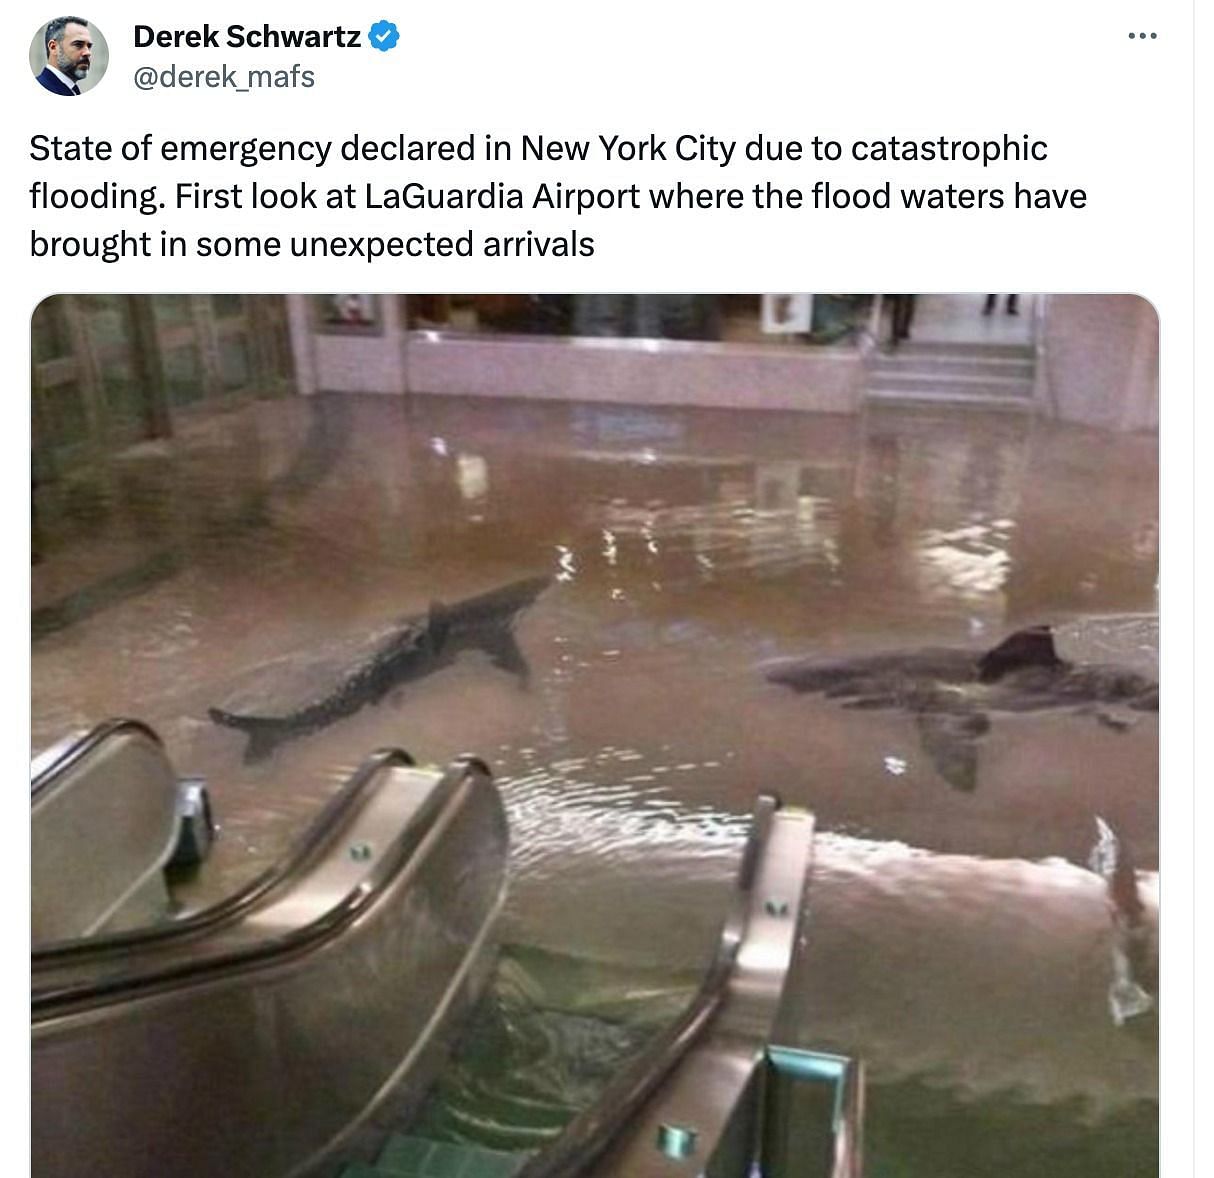 Check out New York Shark